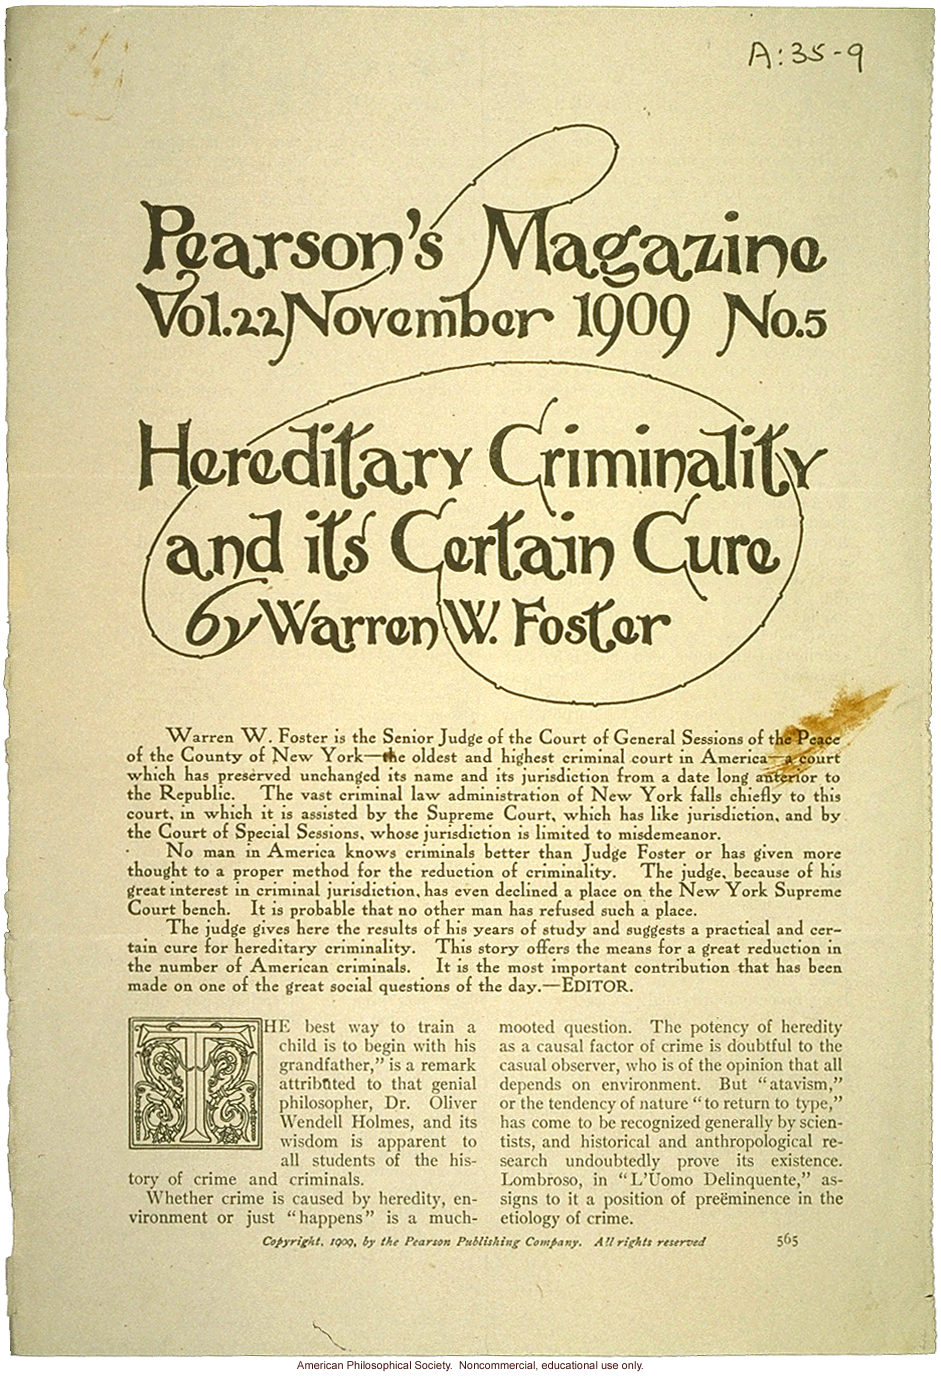 &quote;Heredity Criminality and its Certain Cure,&quote; by Warren Foster,  Pearson's Magazine